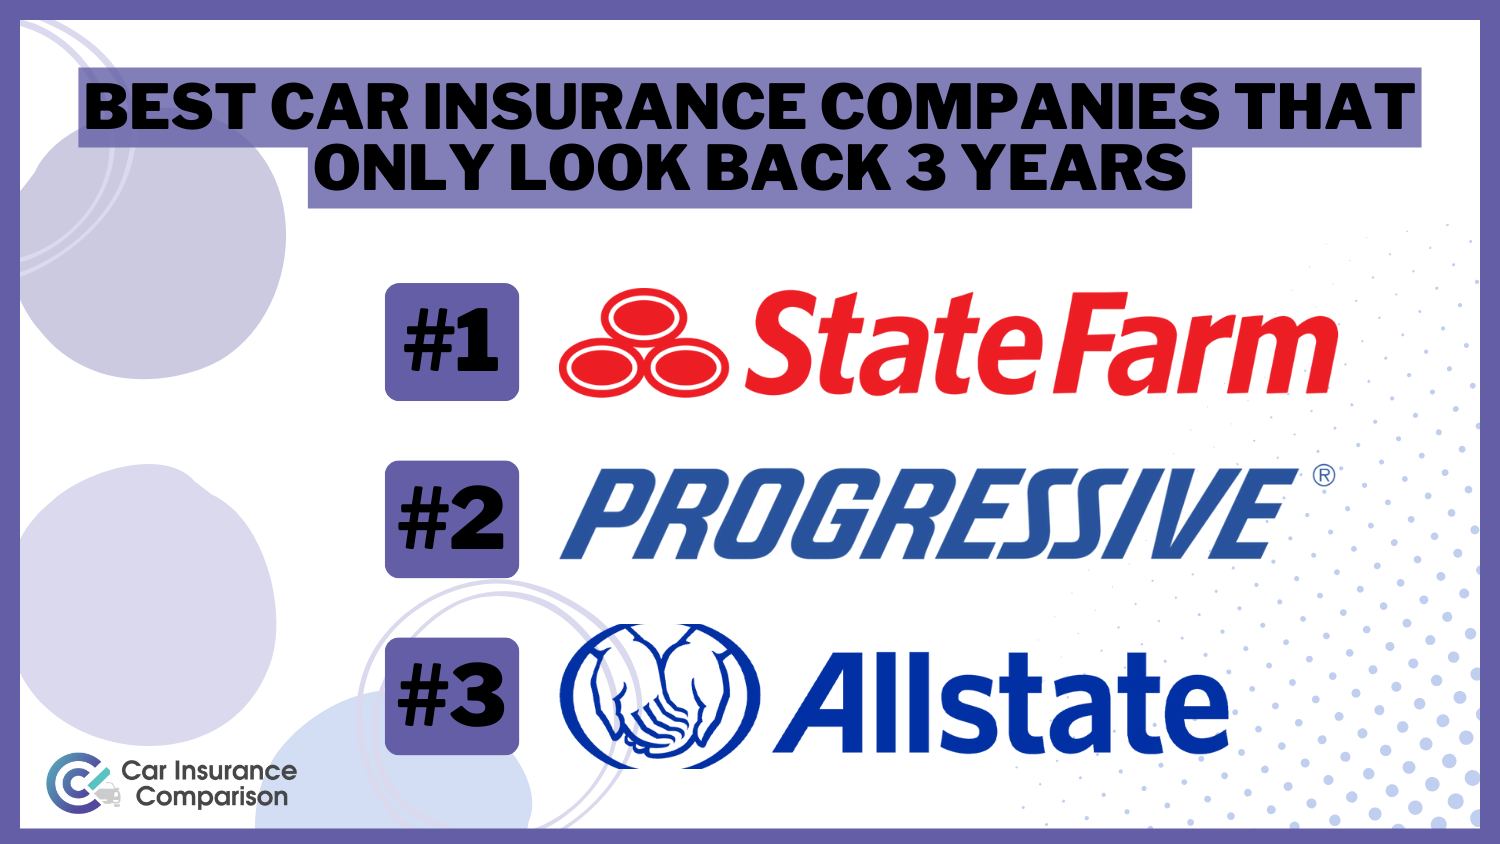 Best Car Insurance Companies That Only Look Back 3 Years: State Farm, Progressive, and Allstate